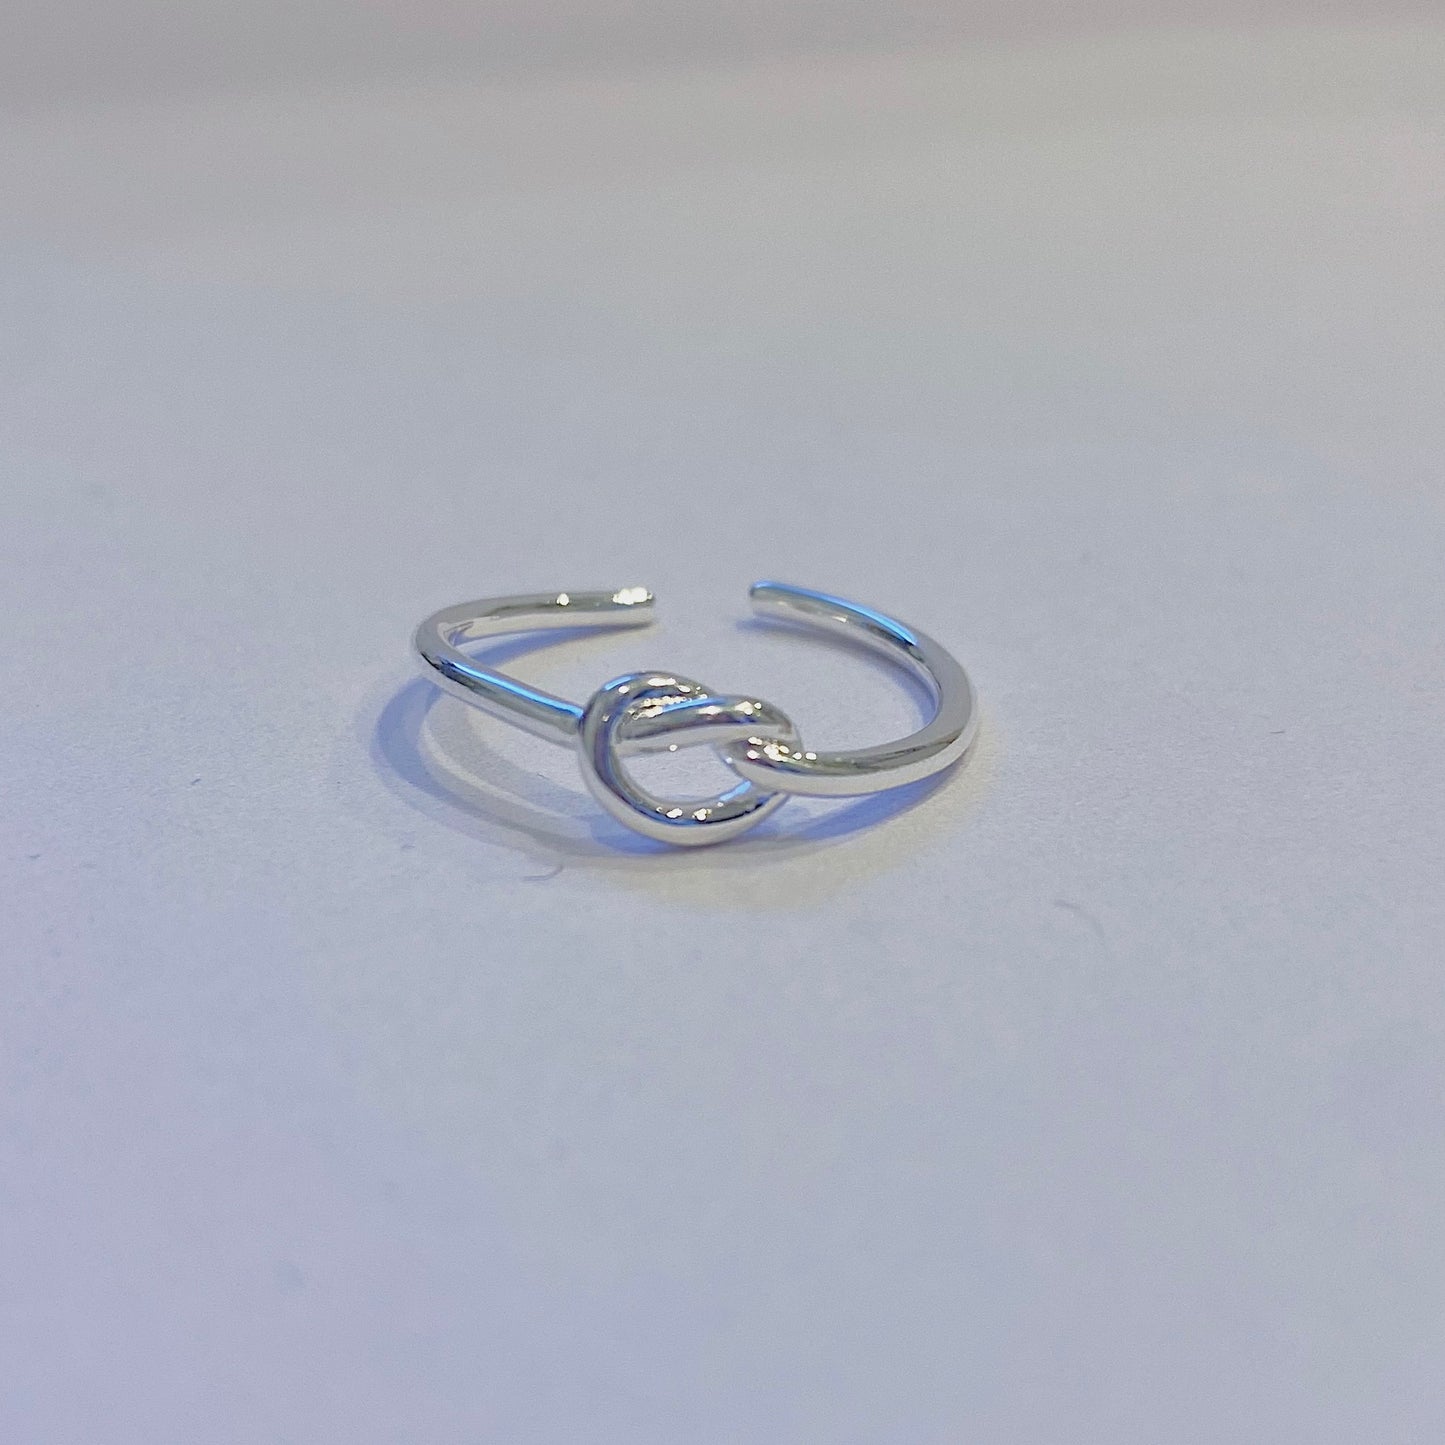 Knot Adjustable Ring